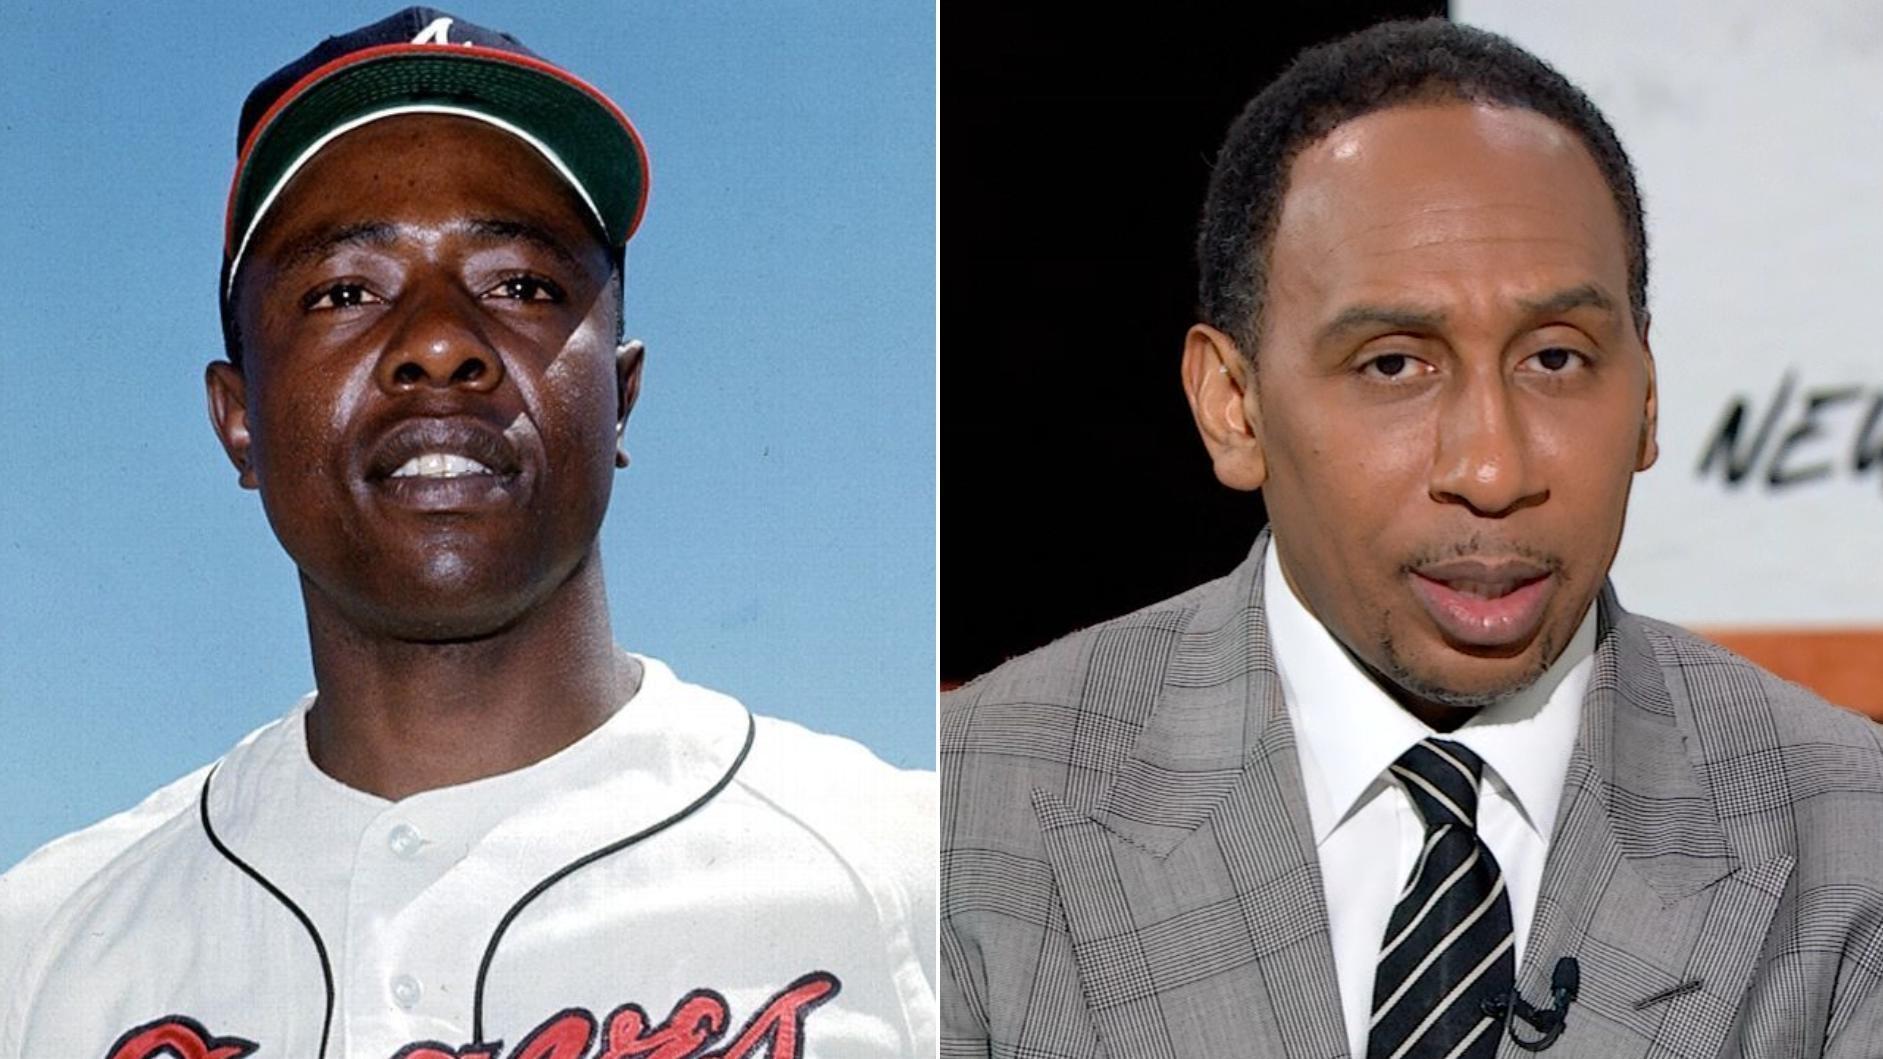 Stephen A. expresses his gratitude for Hank Aaron